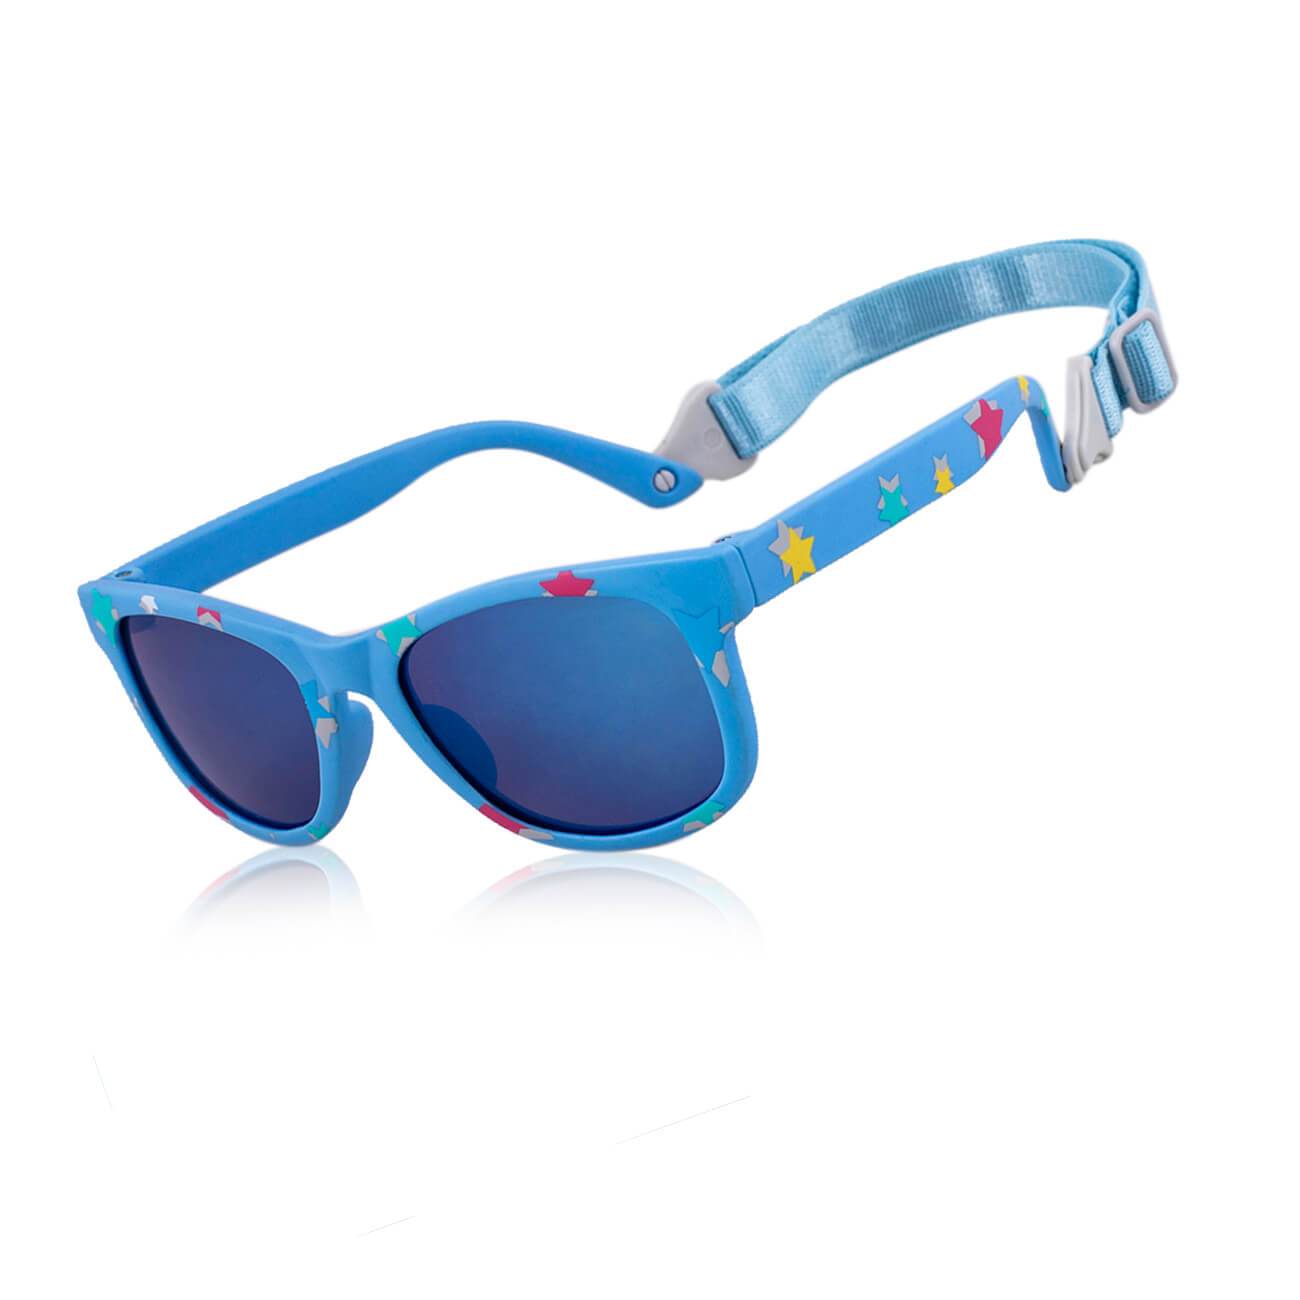 Baby Toddler Bueller Shades UV beach Sunglasses With Strap-W45-blus&star